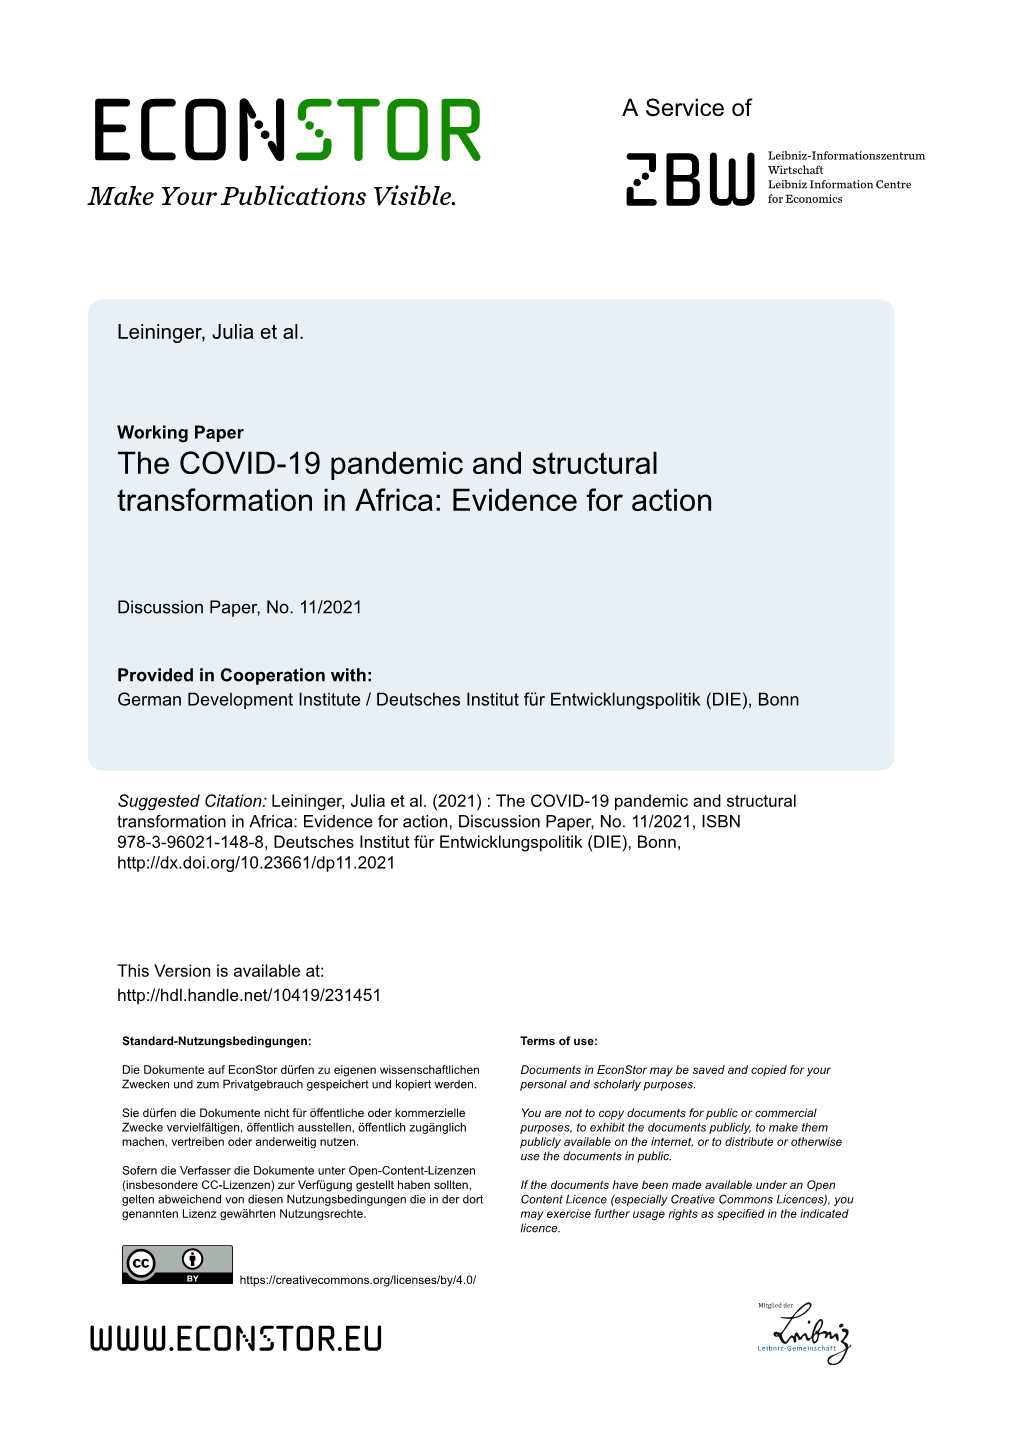 The COVID-19 Pandemic and Structural Transformation in Africa: Evidence for Action